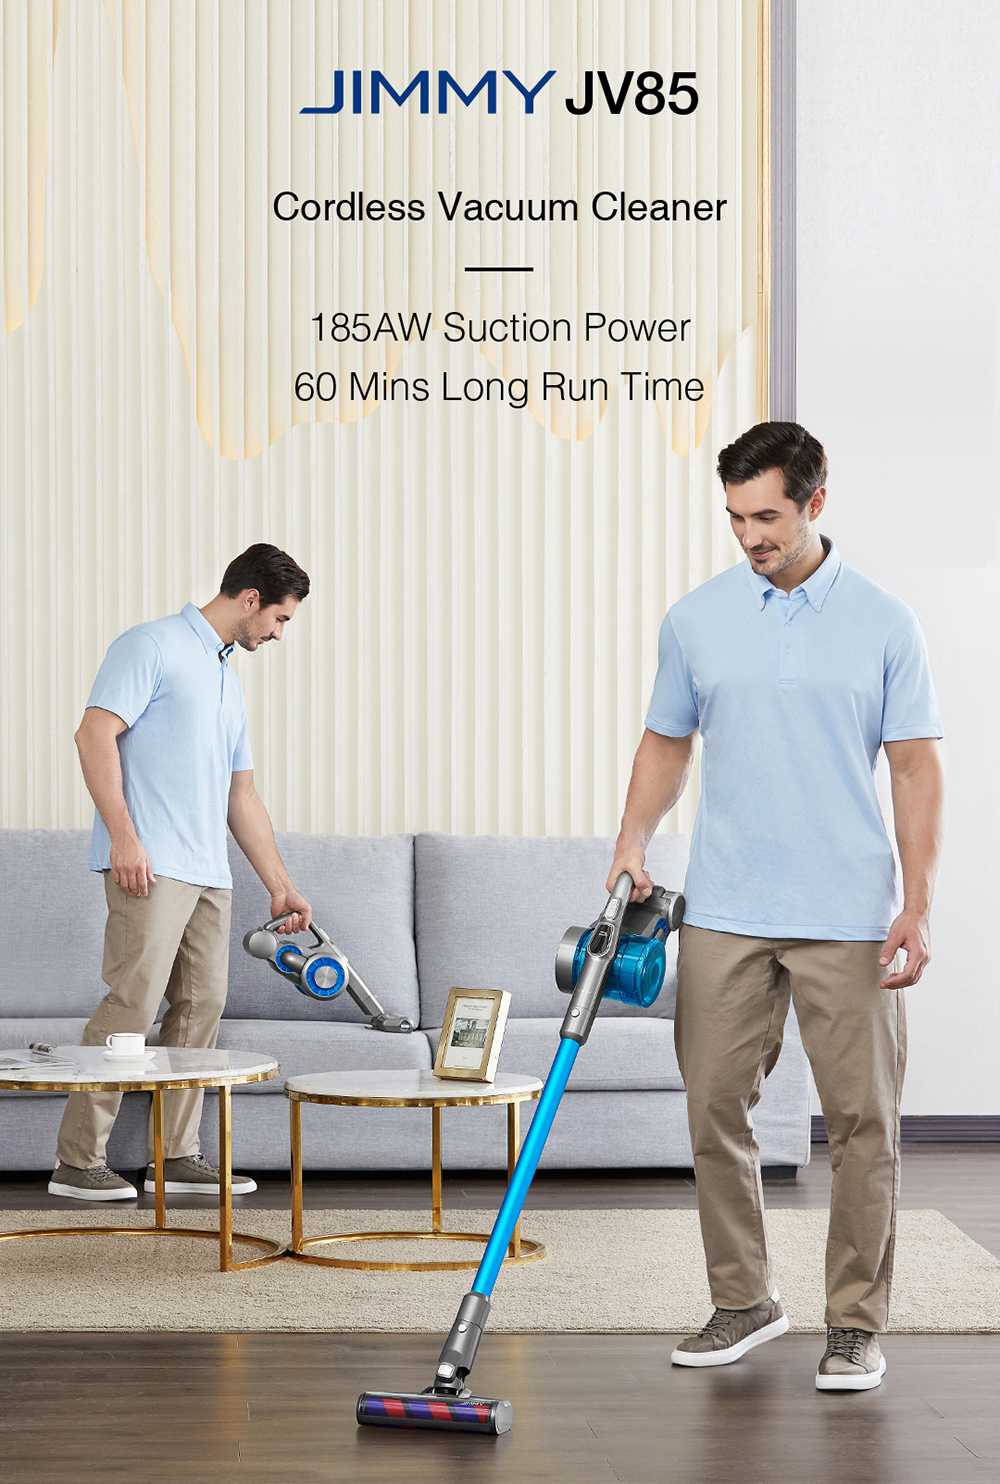 JIMMY JV85 Smart Cordless Handheld Vacuum Cleaner 23000Pa Suction 500W Brushless Motor 60 Minutes Running Time LED Display Global Version - Blue